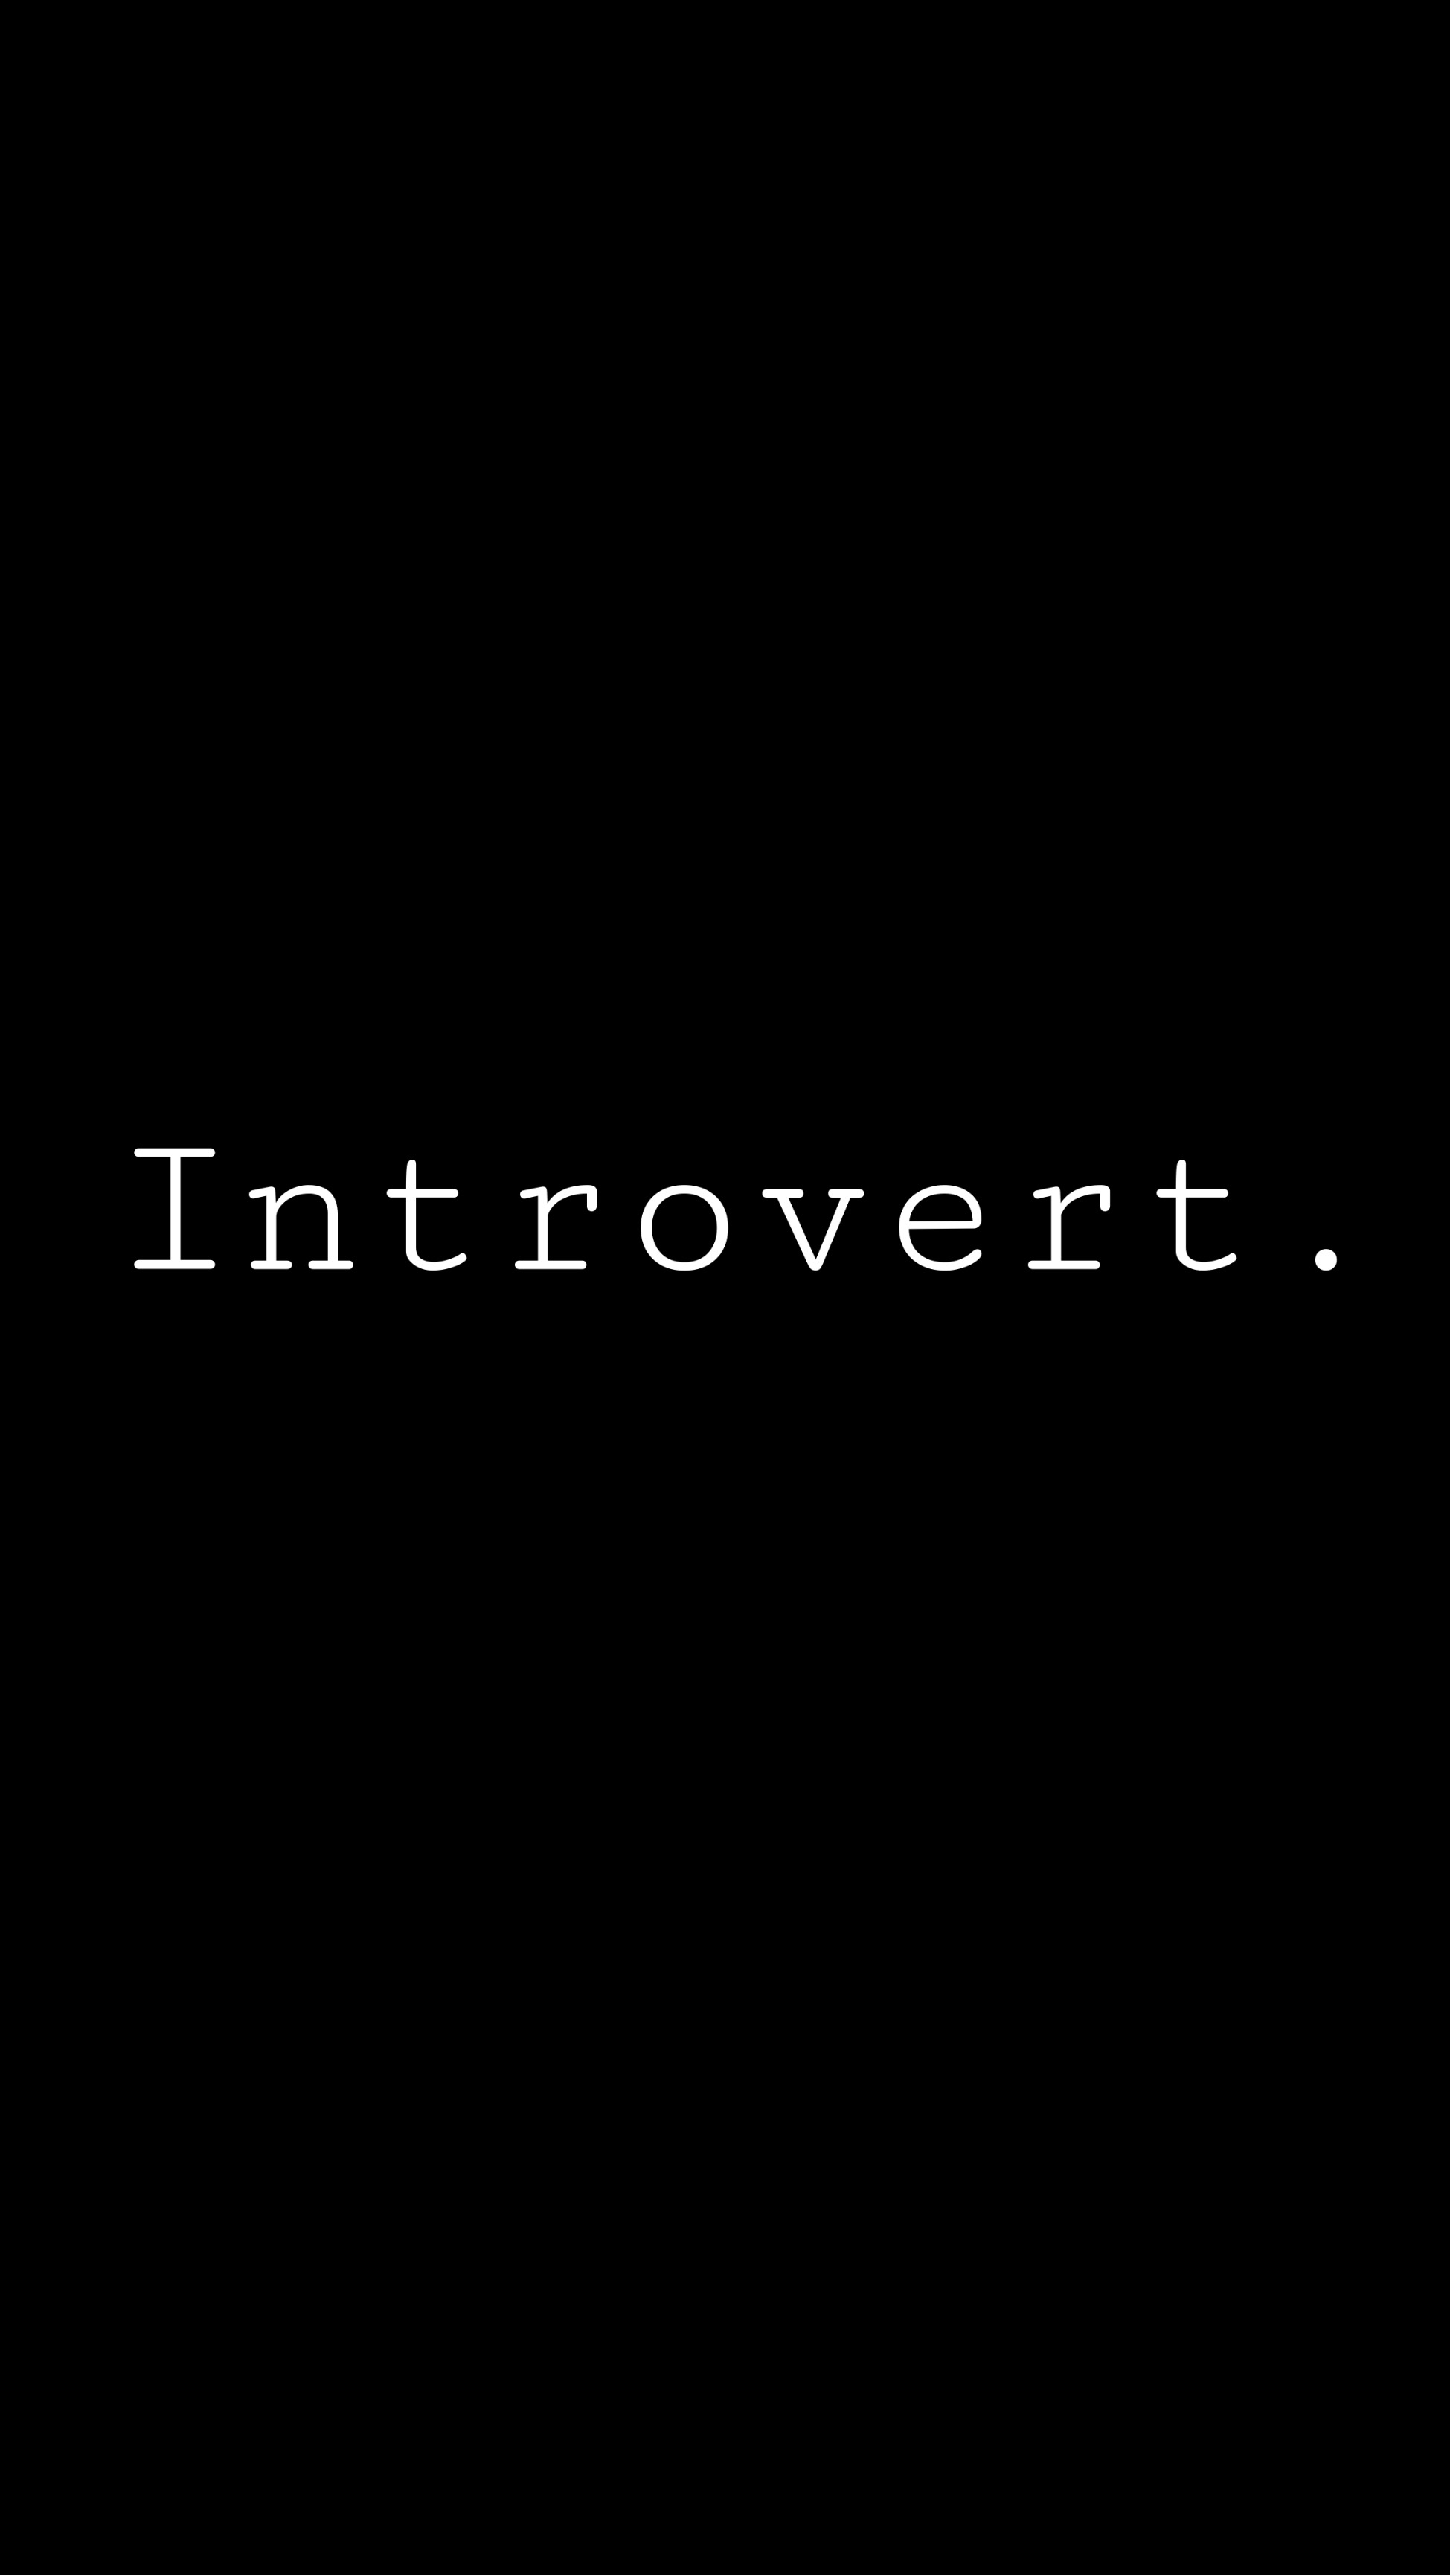 Introvert Wallpapers